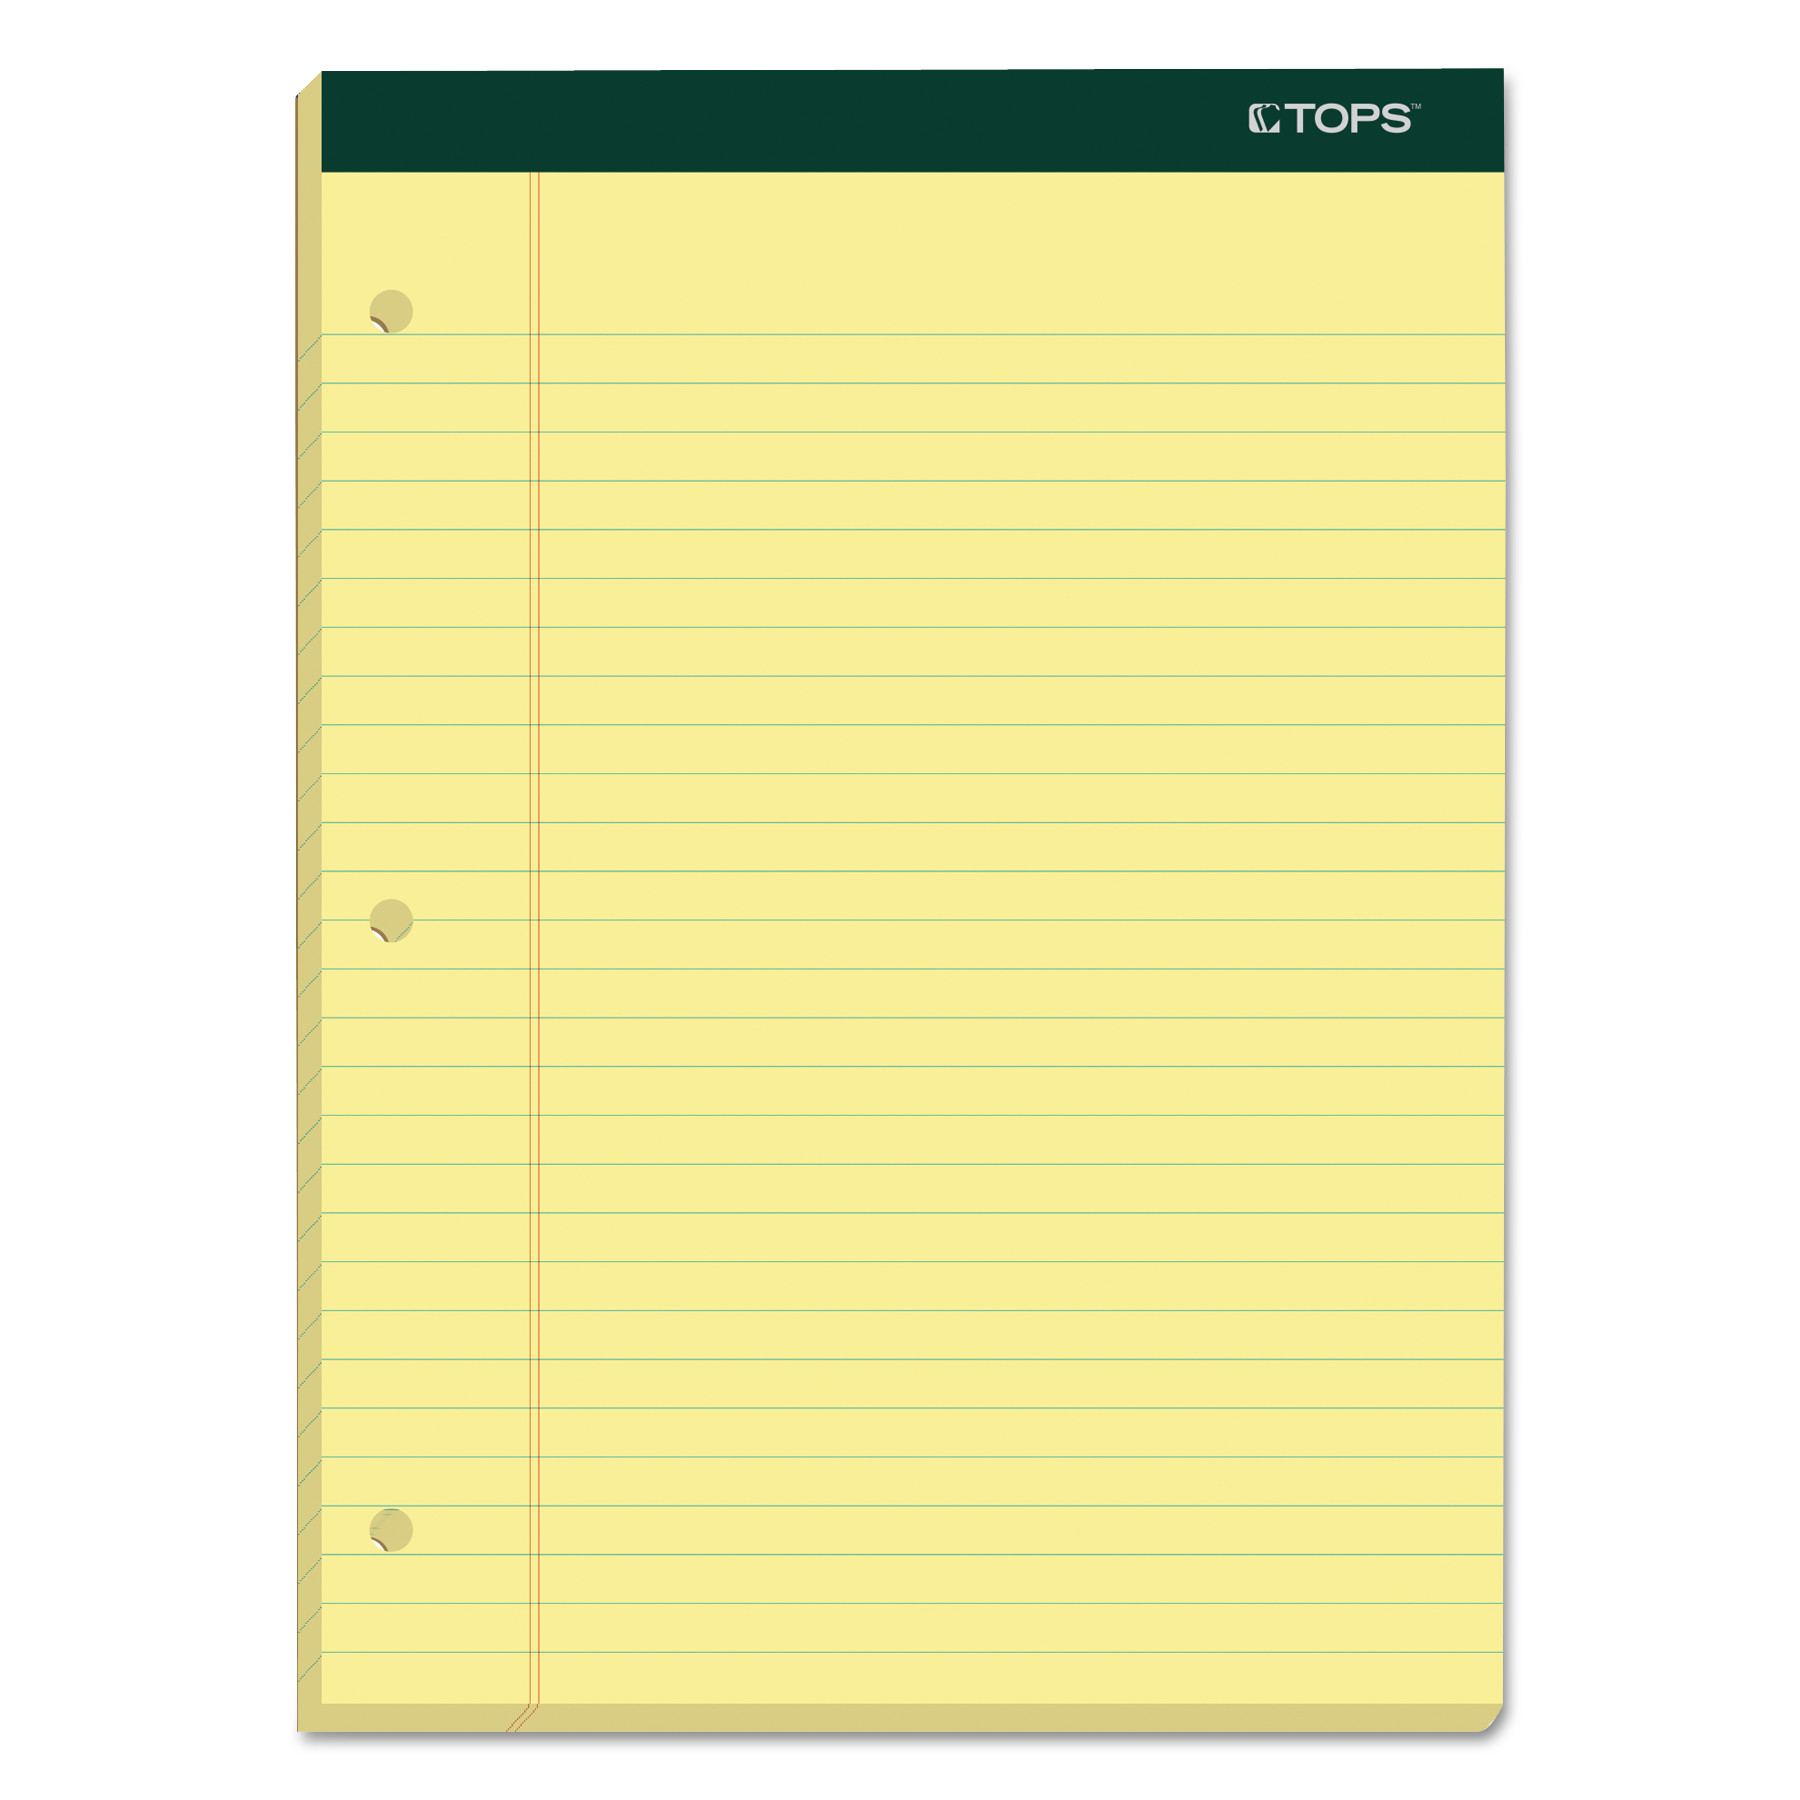  TOPS 63387 Double Docket Ruled Pads, Wide/Legal Rule, 8.5 x 11.75, Canary, 100 Sheets, 6/Pack (TOP63387) 